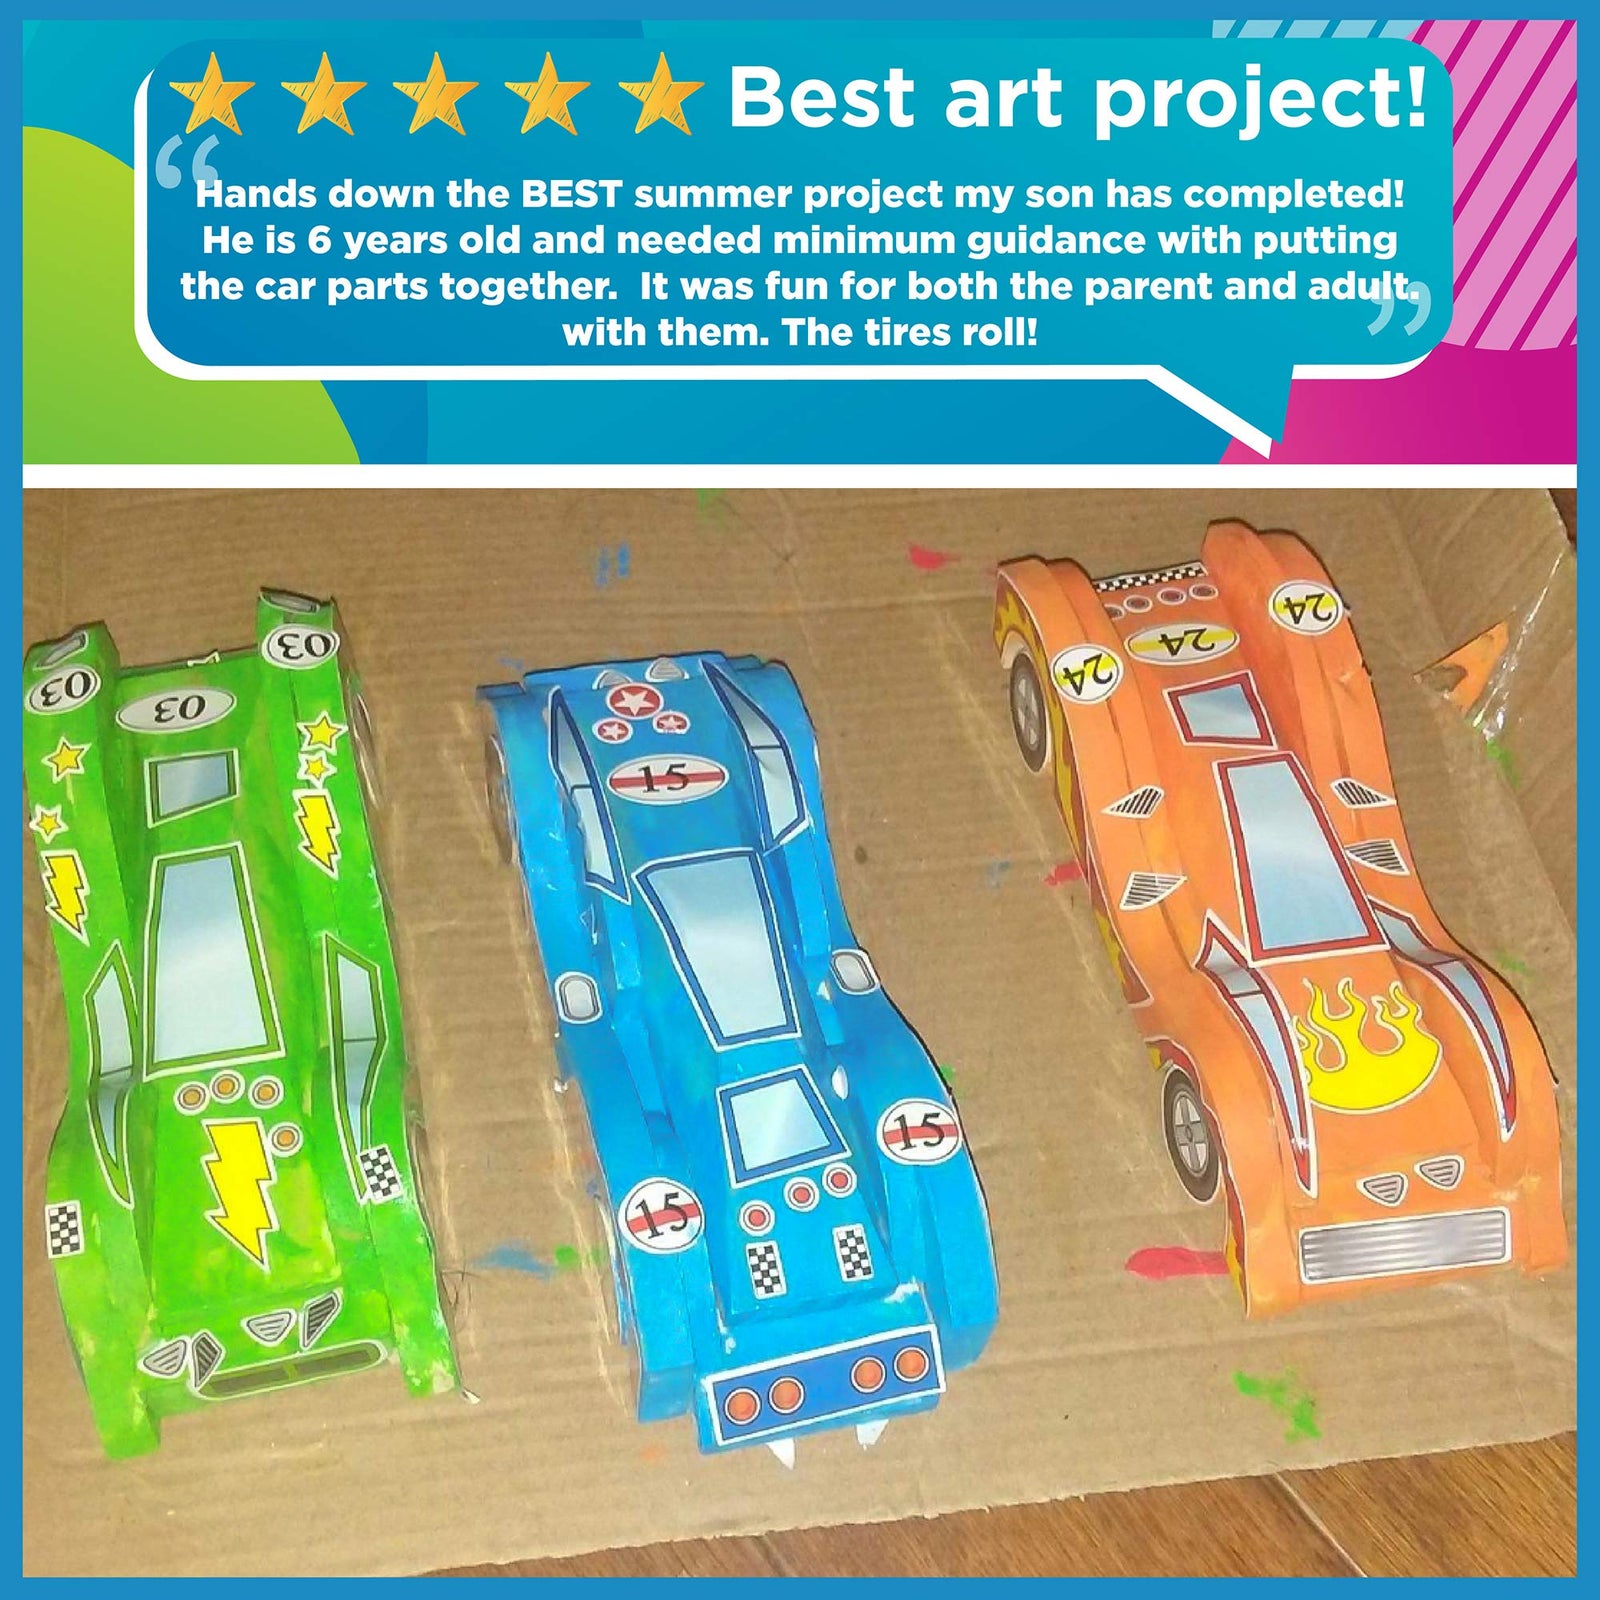 Made By Me Build & Paint Your Own Wooden Cars by Horizon Group Usa, DIY Wood Craft Kit, Easy To Assemble & Paint 3 Race Cars, Multicolored